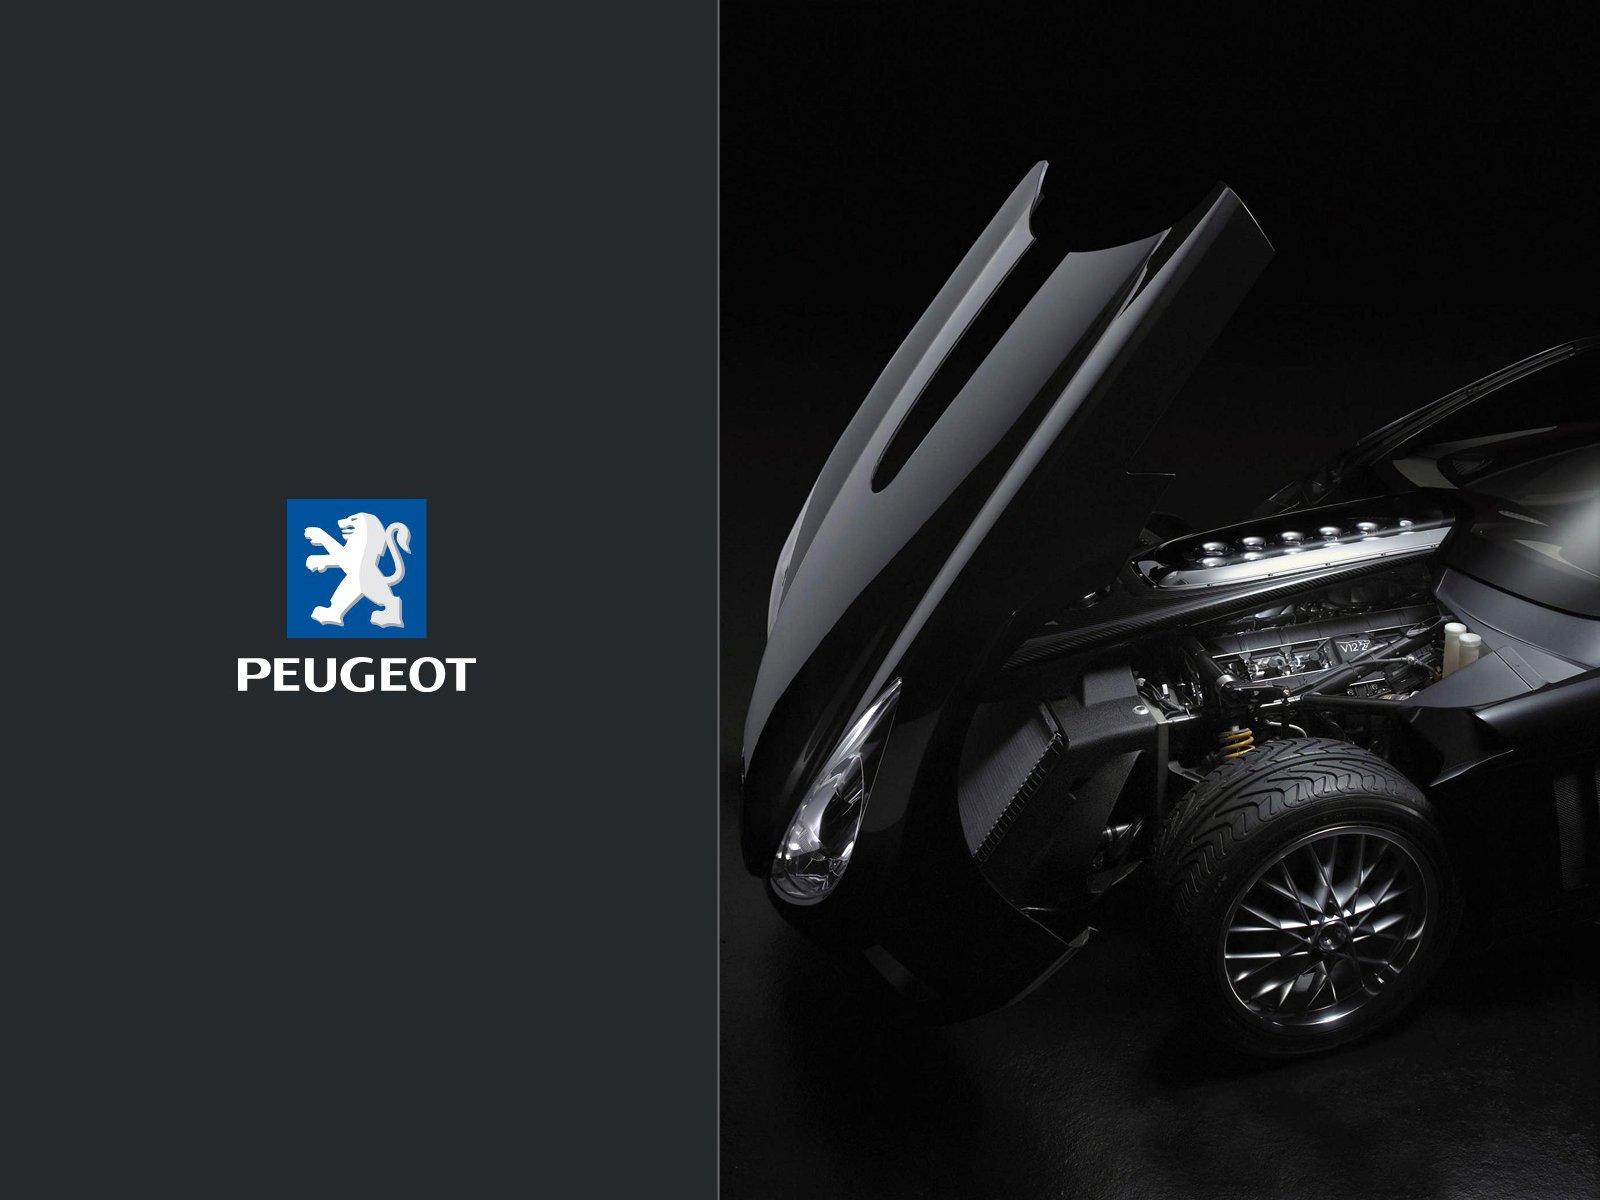 Peugeot Background for PC Awesome Image